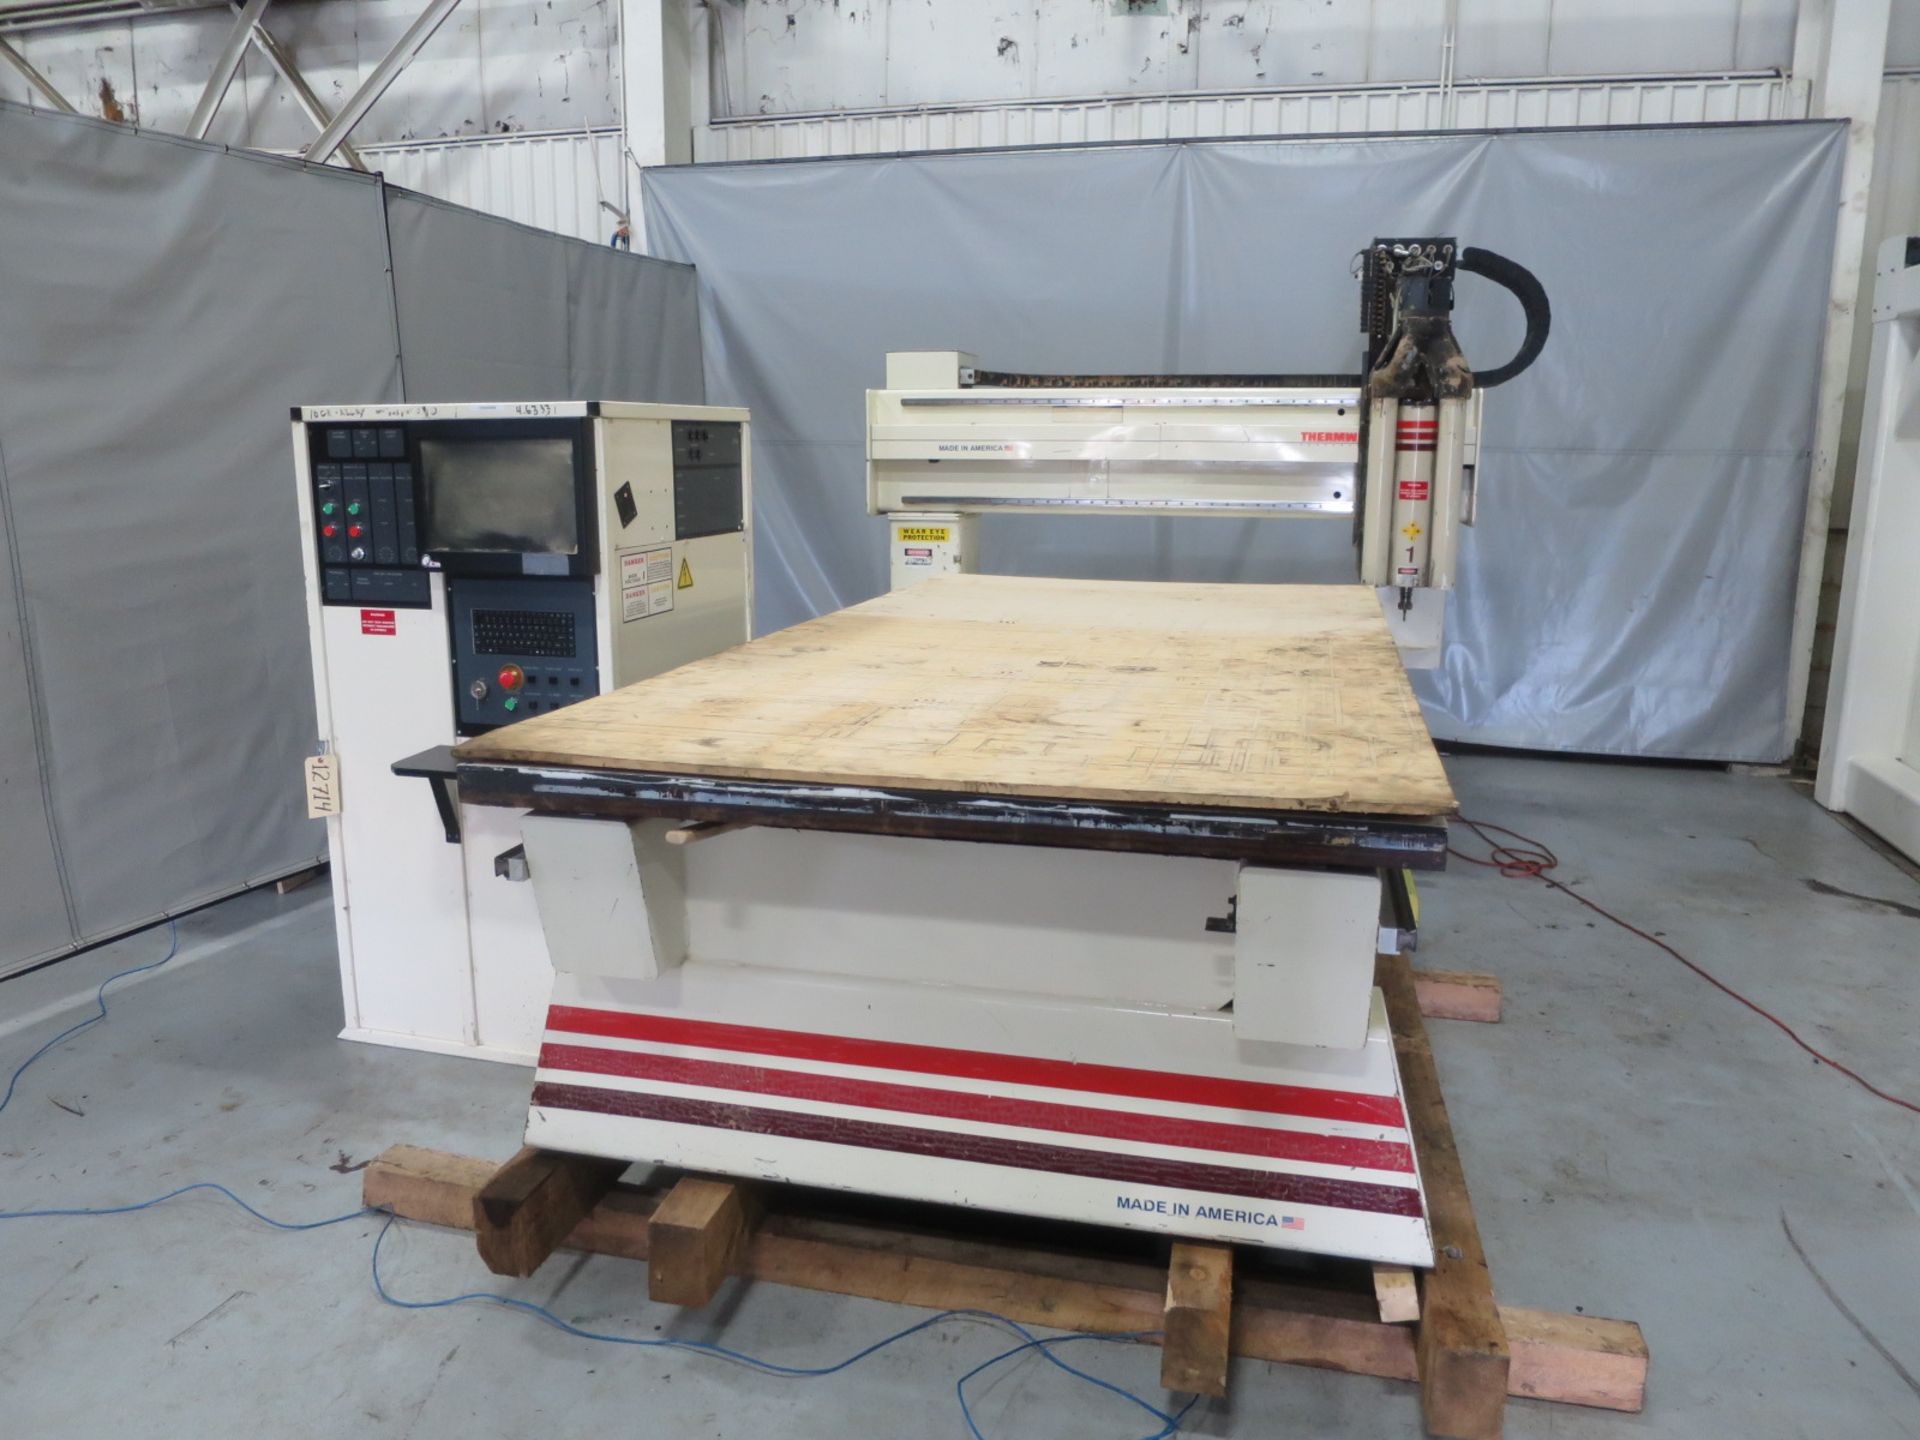 5'X10' Thermwood C53 3-Axis CNC Router w/Qcore Upgrade, , S/N C530550596, New 1996,